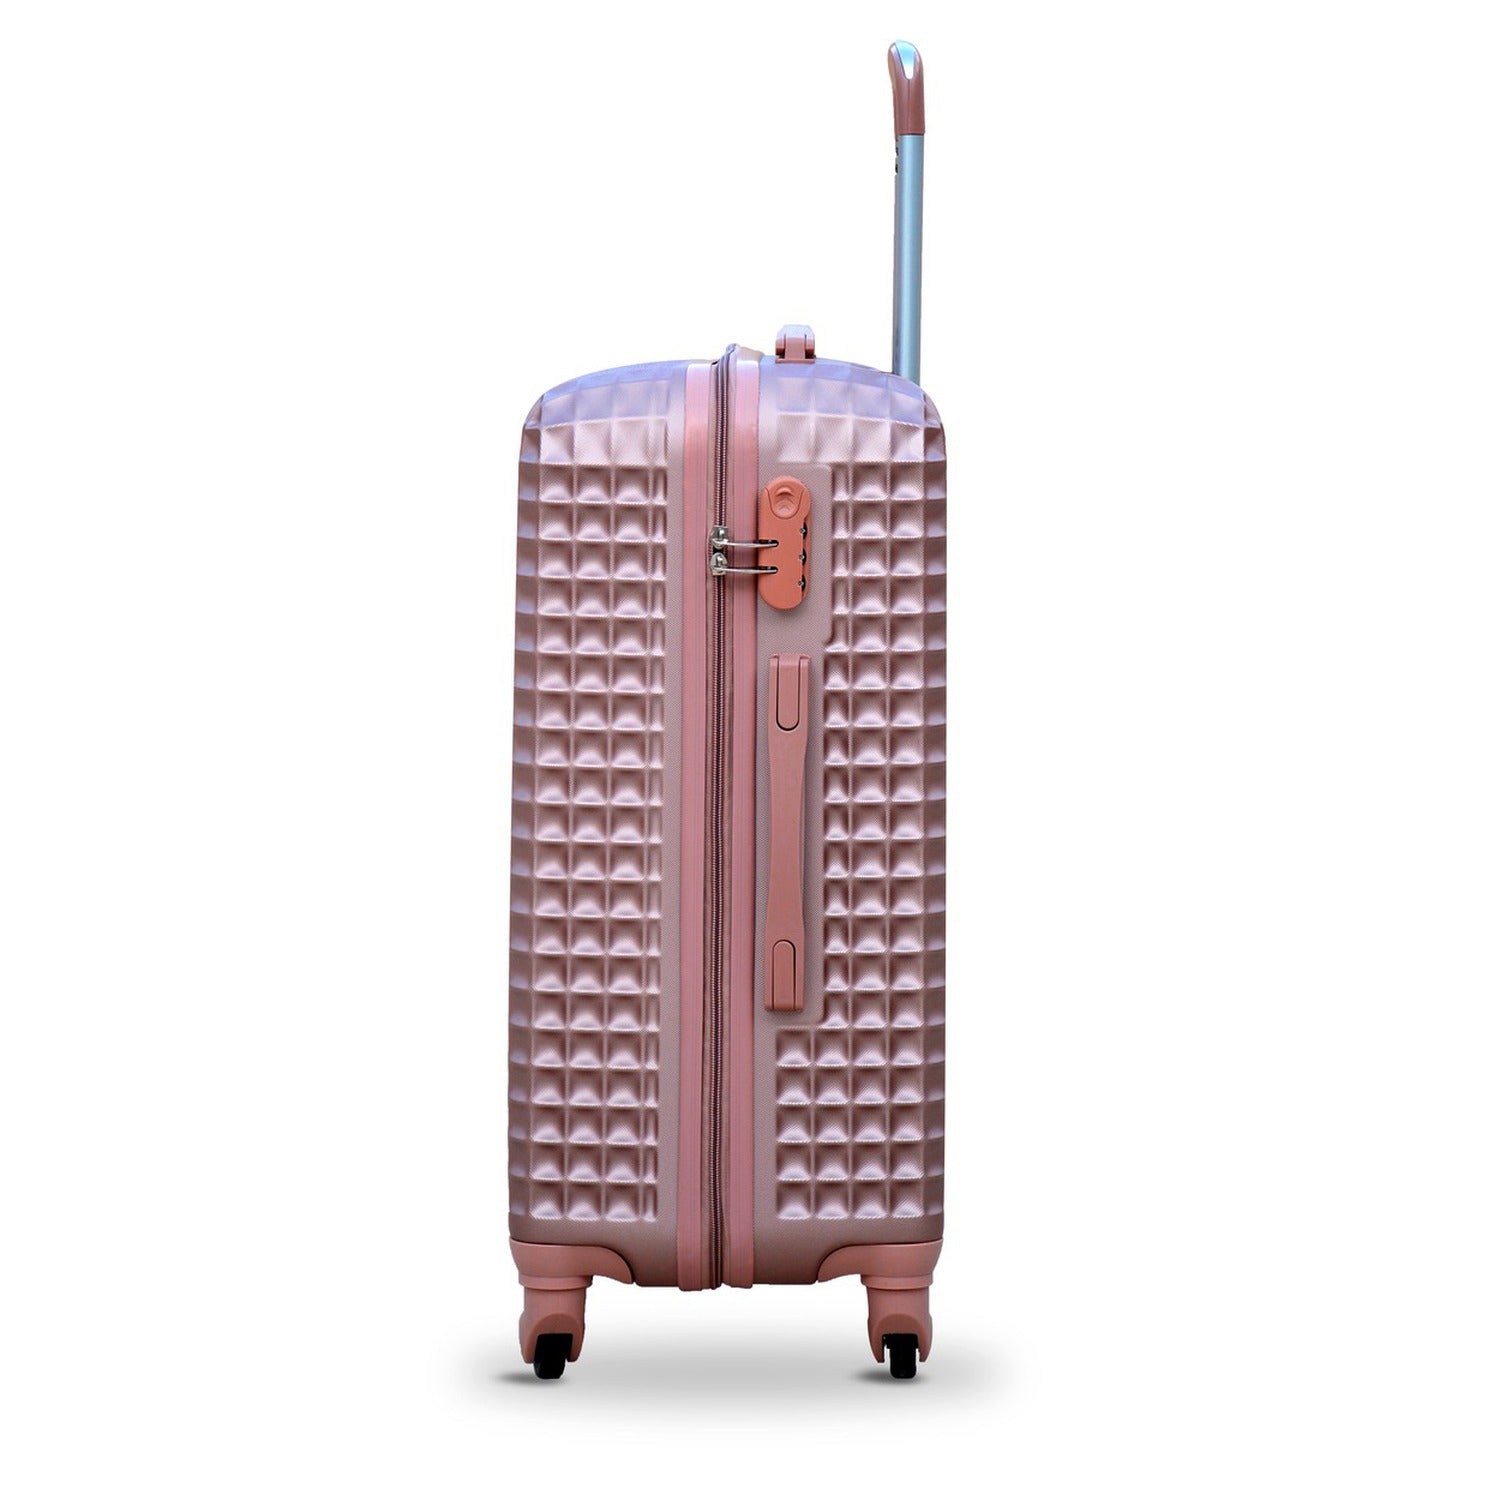 32" Rose Gold Colour Square Cut ABS Luggage Lightweight Hard Case Trolley Bag | 2 Year Warranty